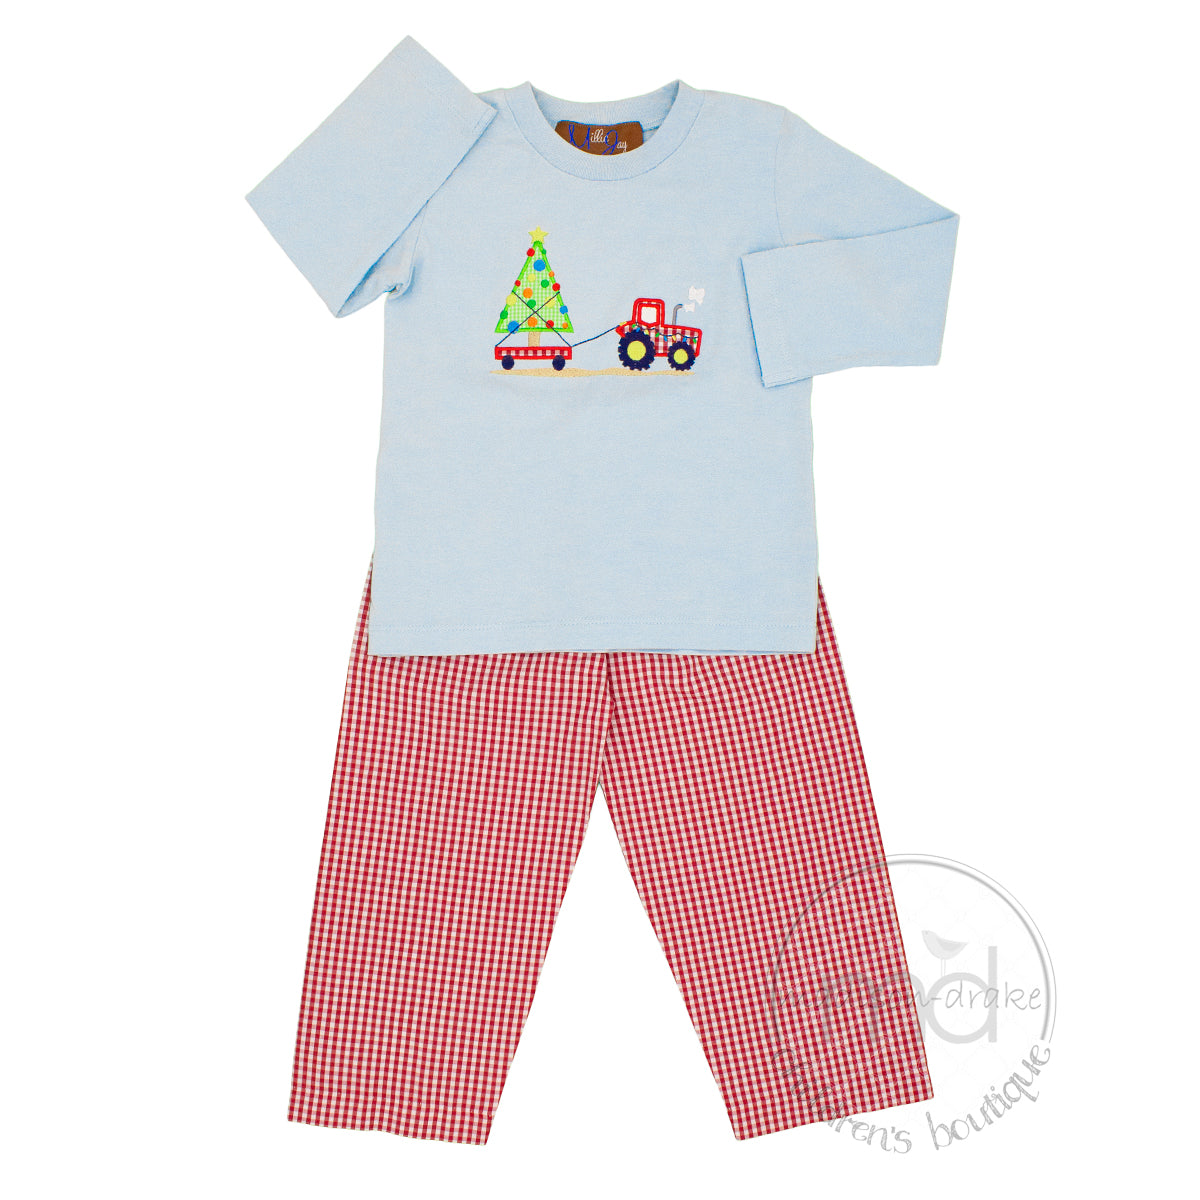 Toddler Boy's Bringing Home the Tree Christmas Pants Set by Millie Jay